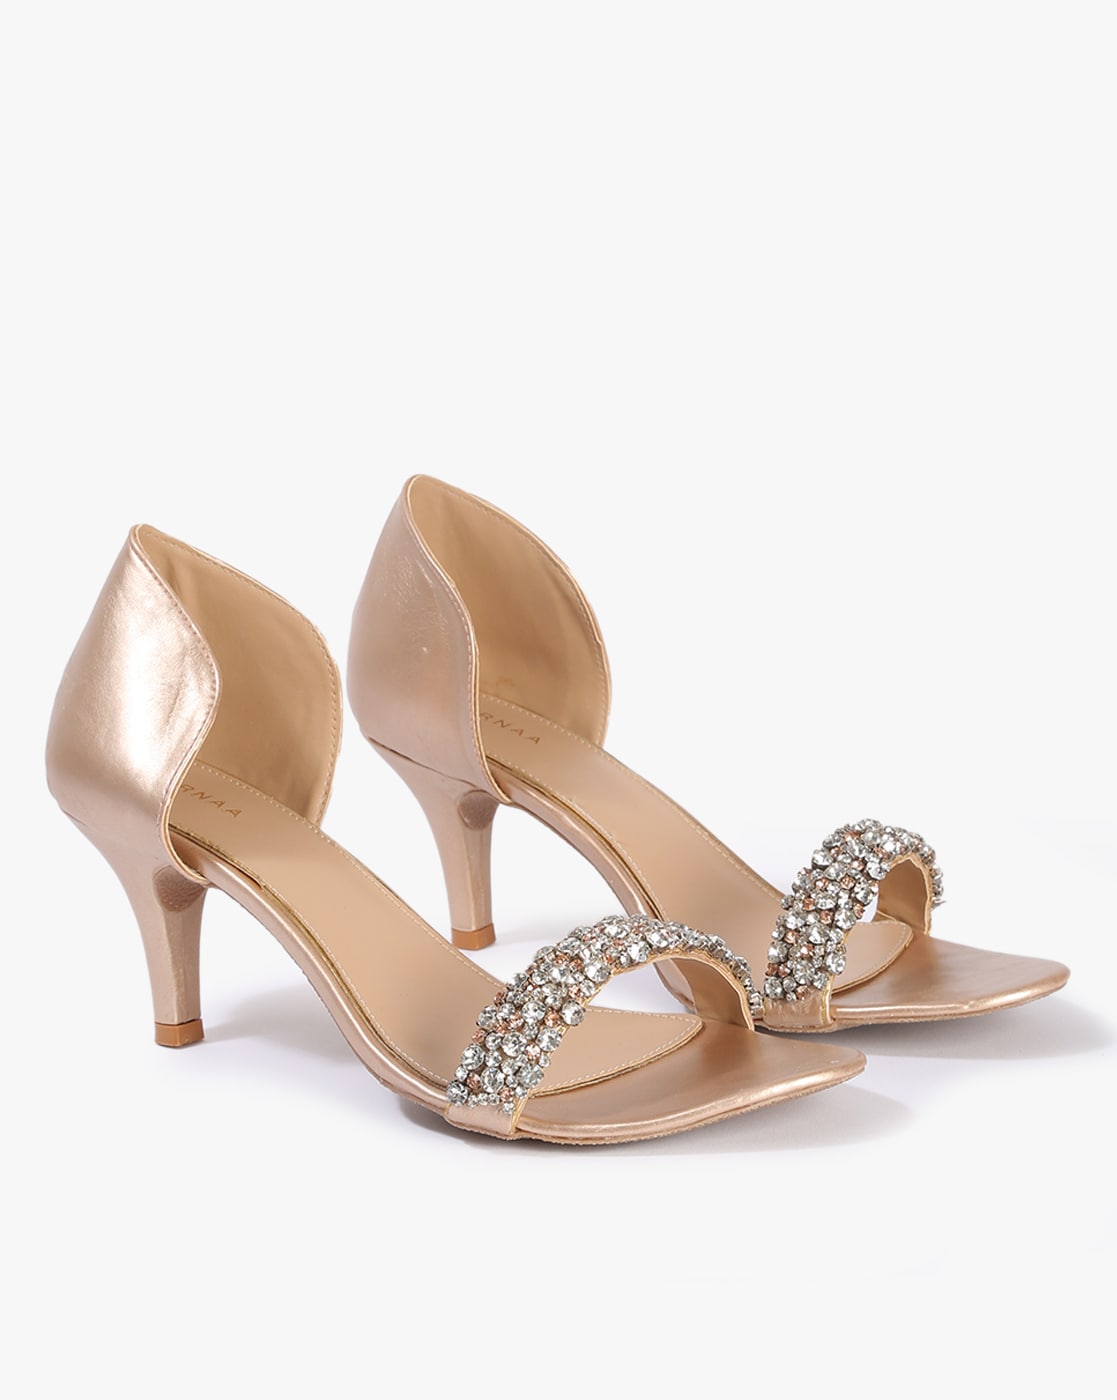 27 Gold Sandals, Heels and Flats for Your Wedding Day | City sandals, Sandals  heels, Heels